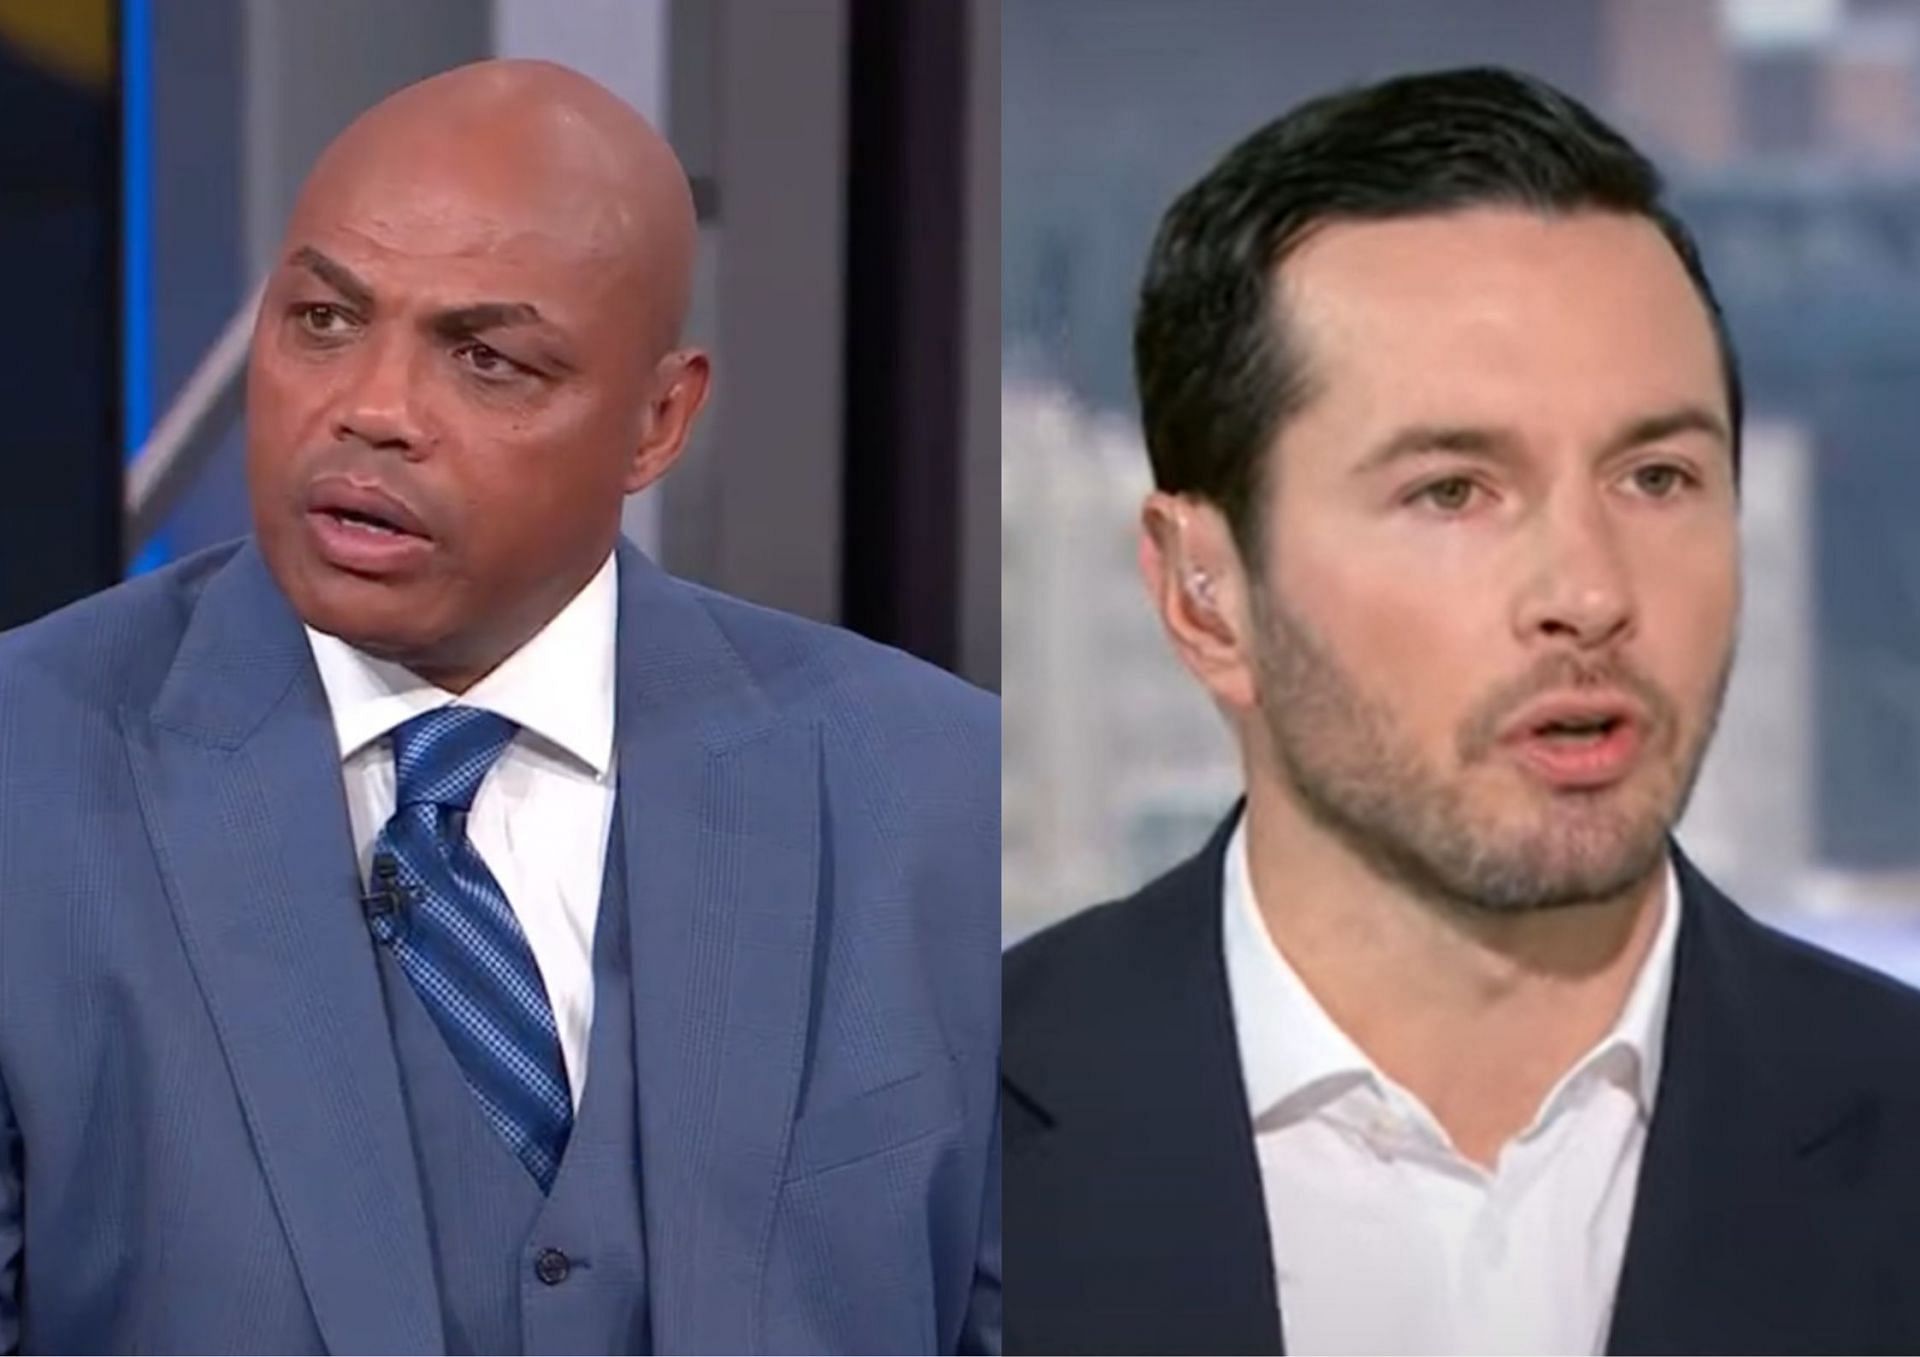 Charles Barkley blasted some basketball analysts who defended Memphis Grizzlies